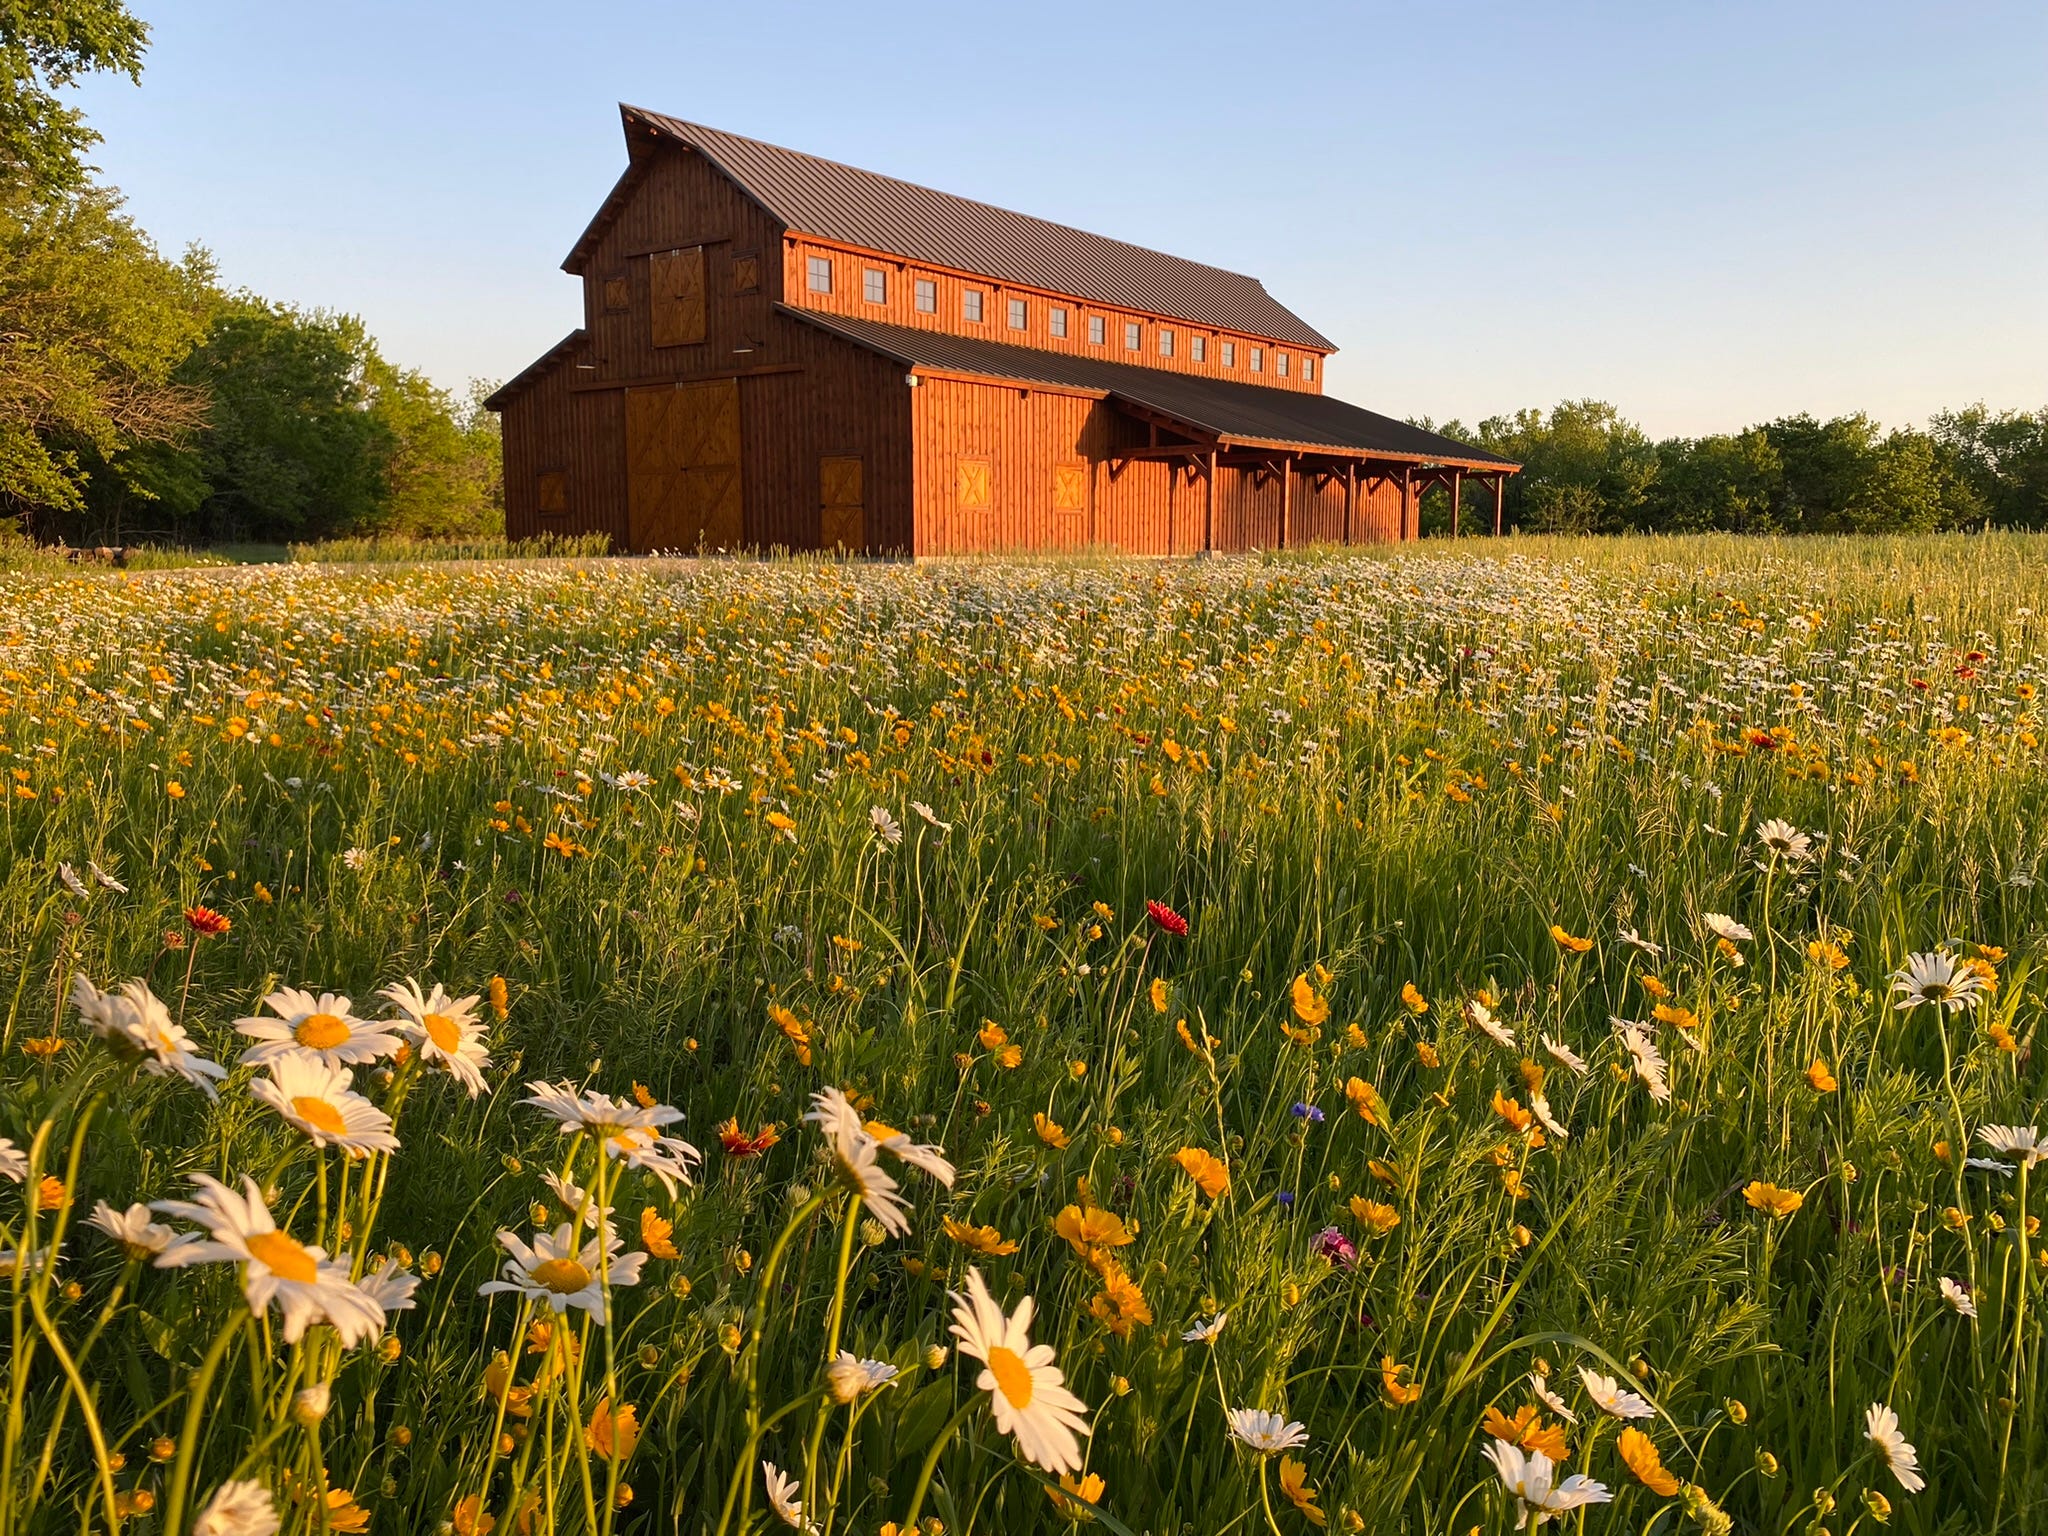 Wildflower meadow in front of a large red barn